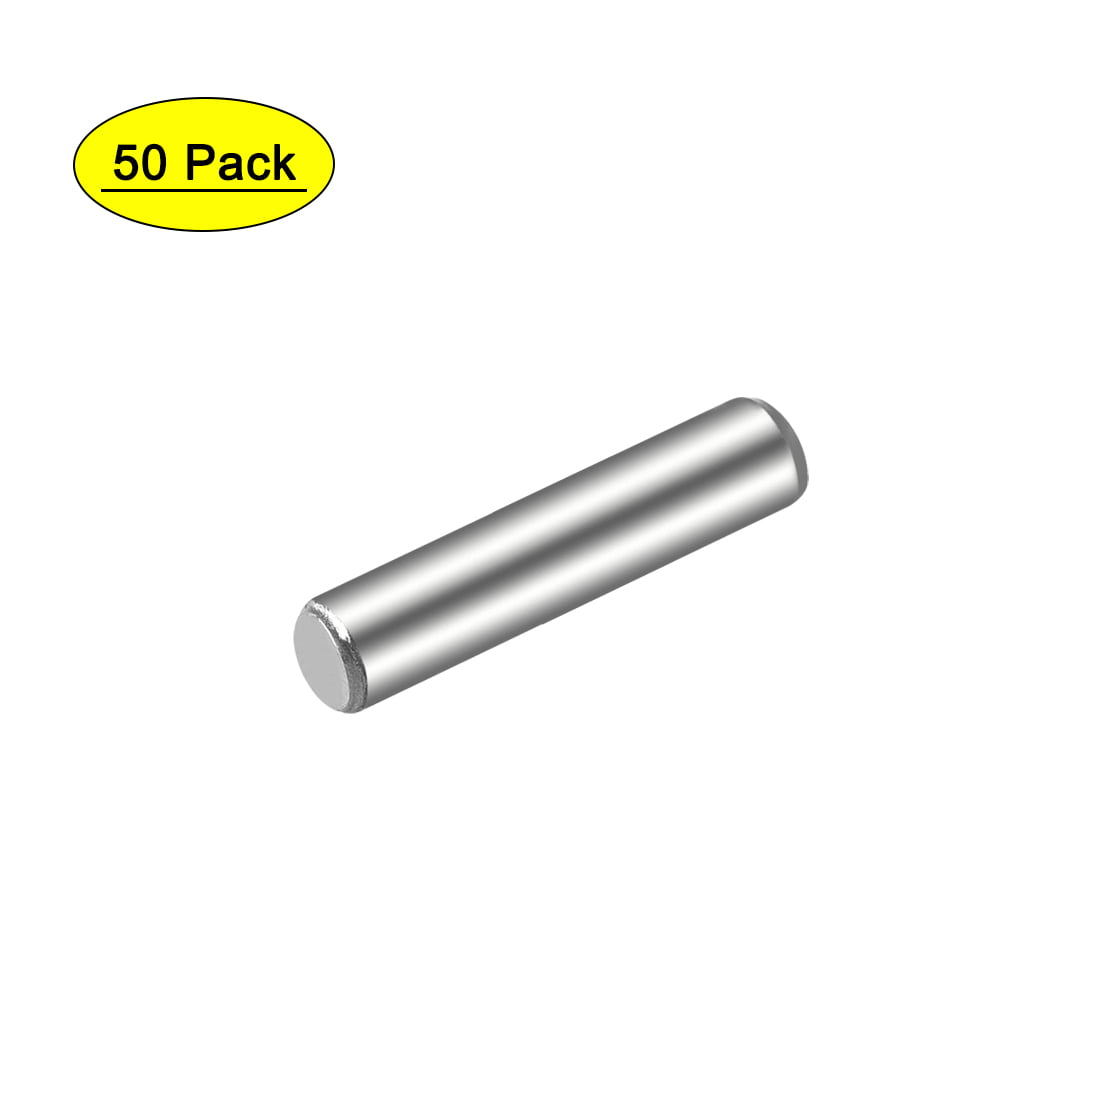 50Pcs 4mm x 16mm Dowel Pin 304 Stainless Steel Shelf Support Pin Silver Tone 